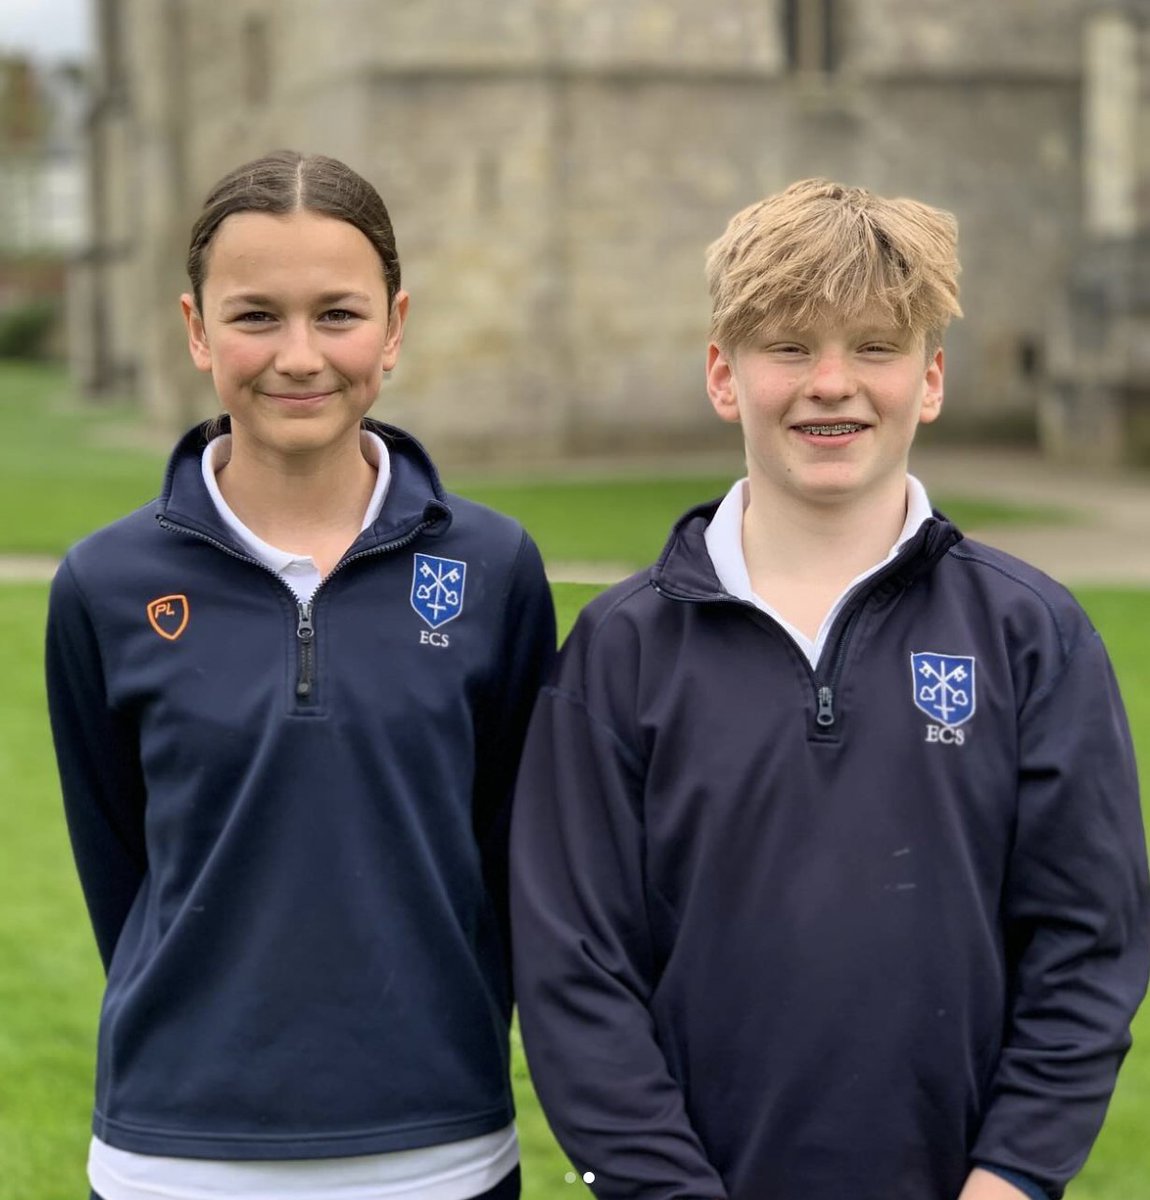 We are delighted to announce the appointments of our Trinity Term Captains of Cricket and Athletics! 🏏 Captains of Cricket - Henry and Kate 🏃 Captains of Athletics - Adam and Olivia